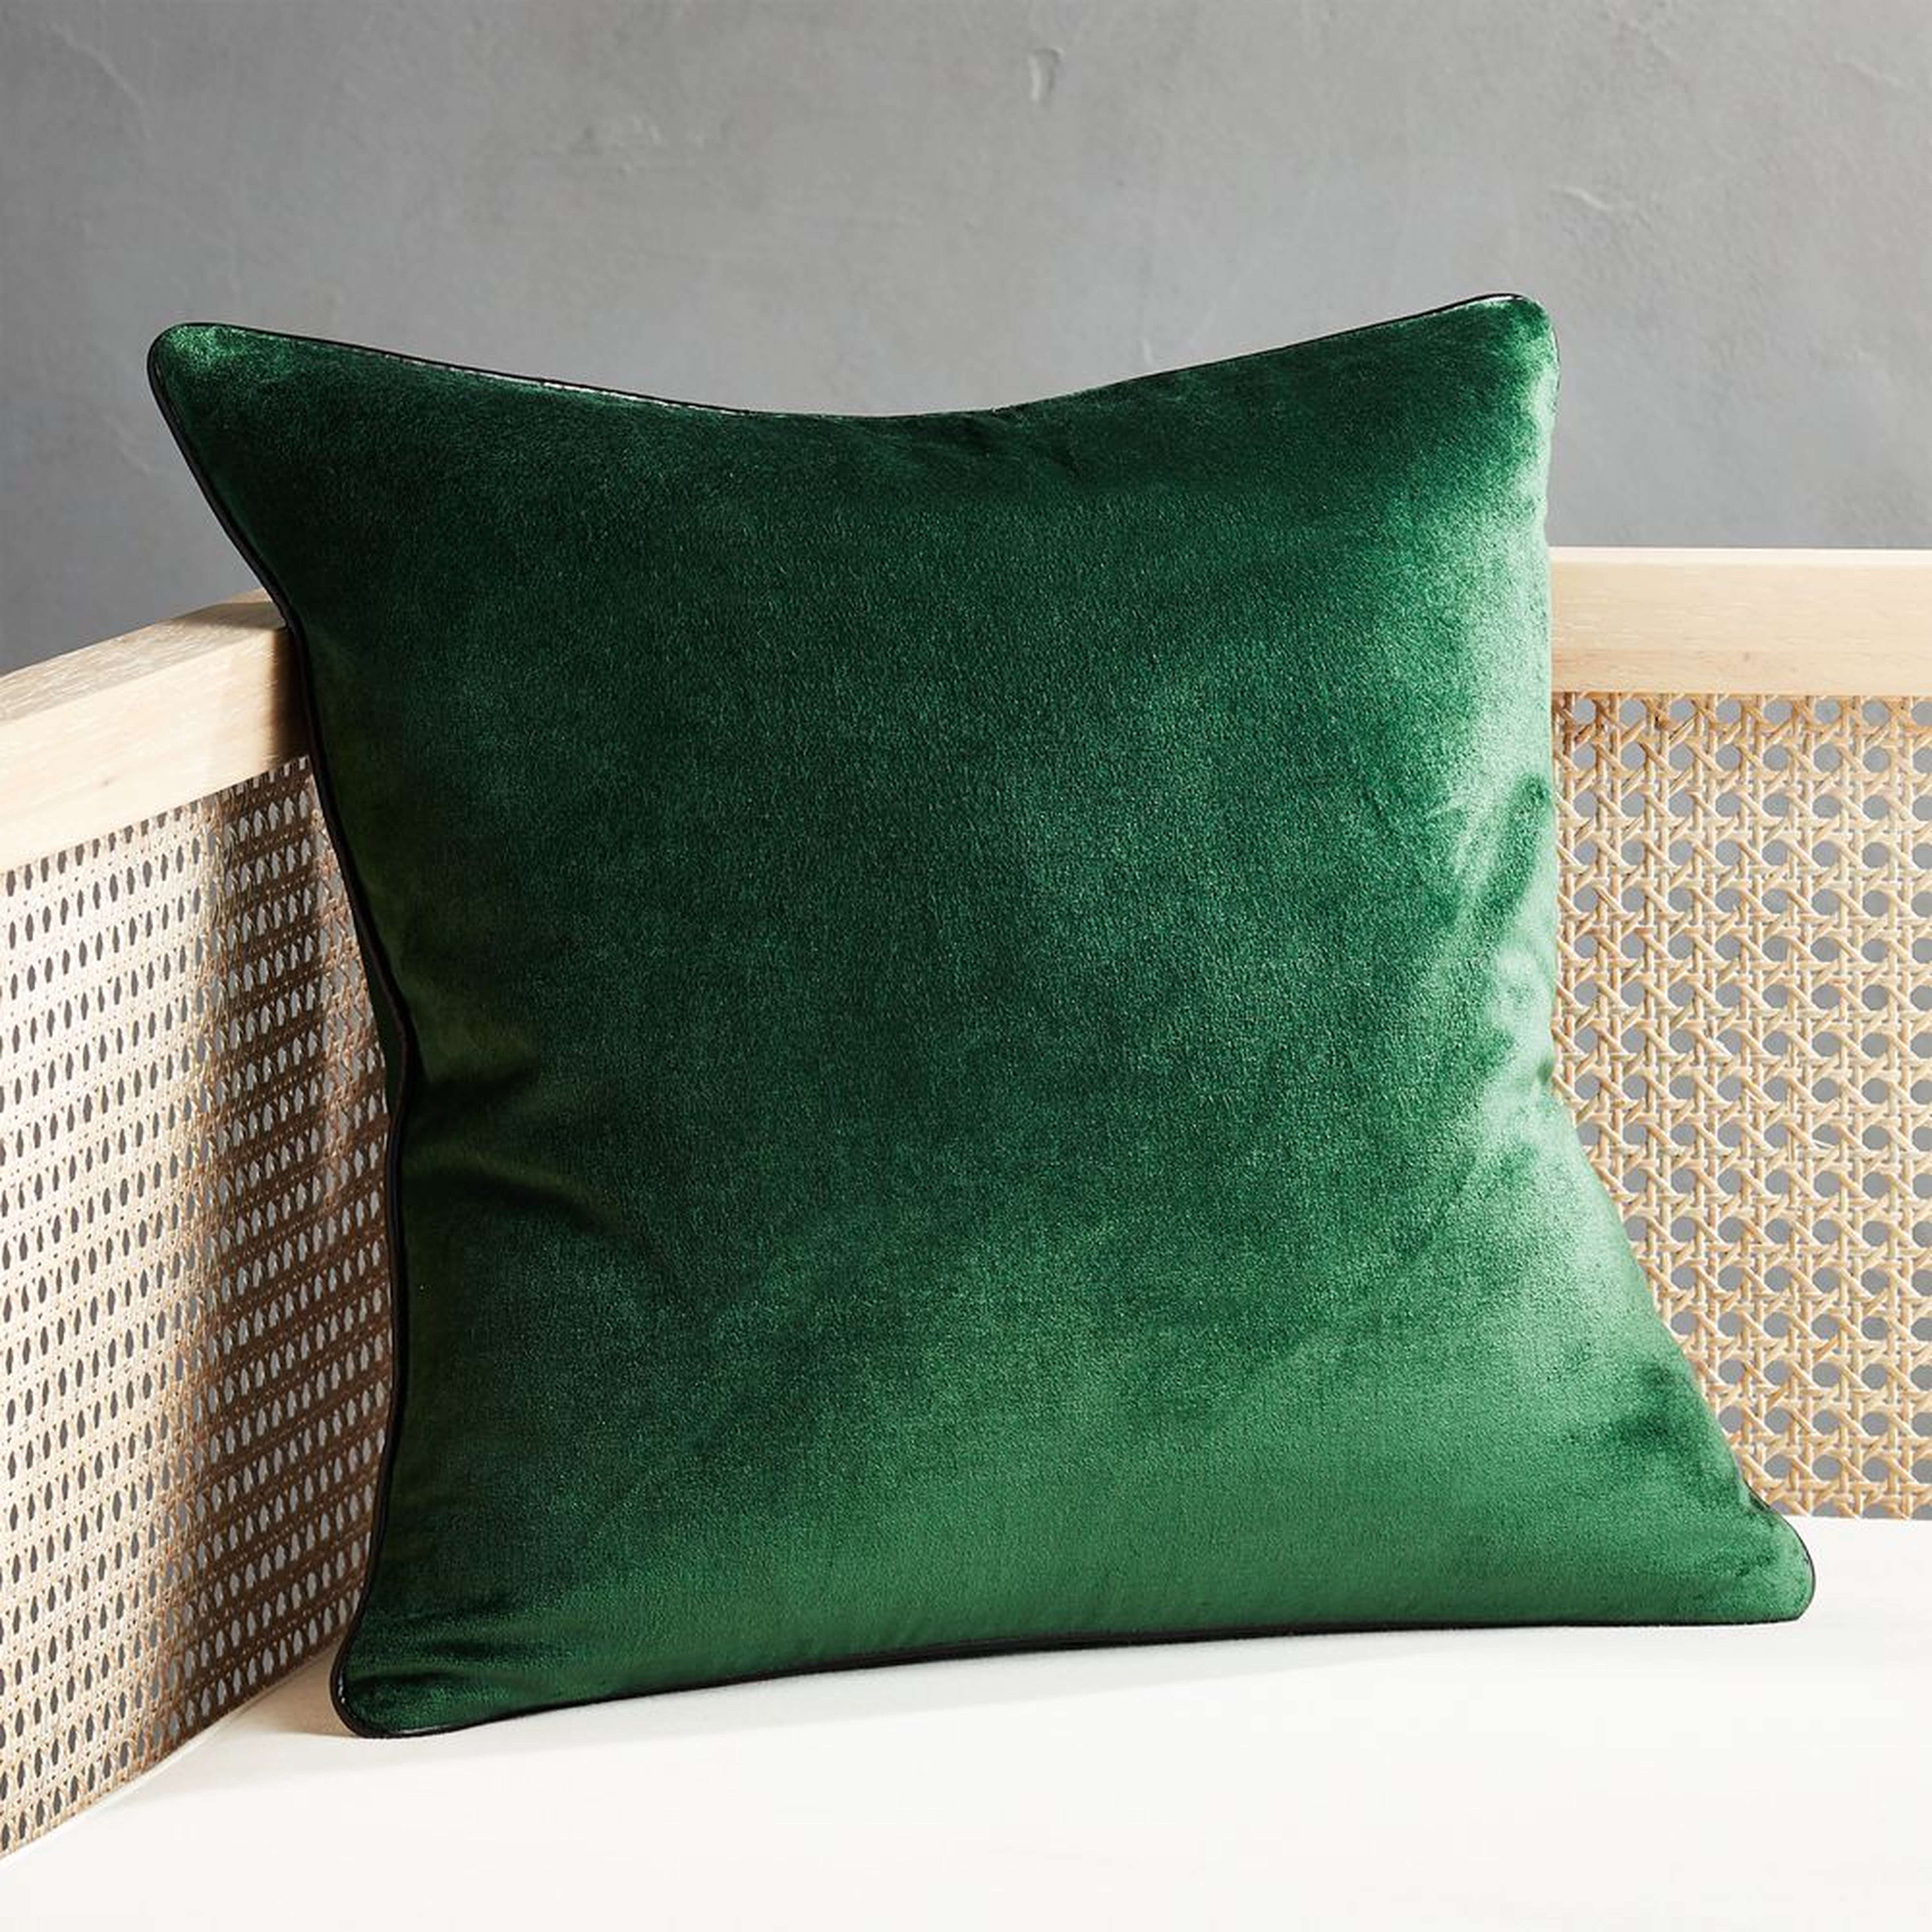 18" Emerald Crushed Velvet Pillow with Feather-Down Insert - CB2